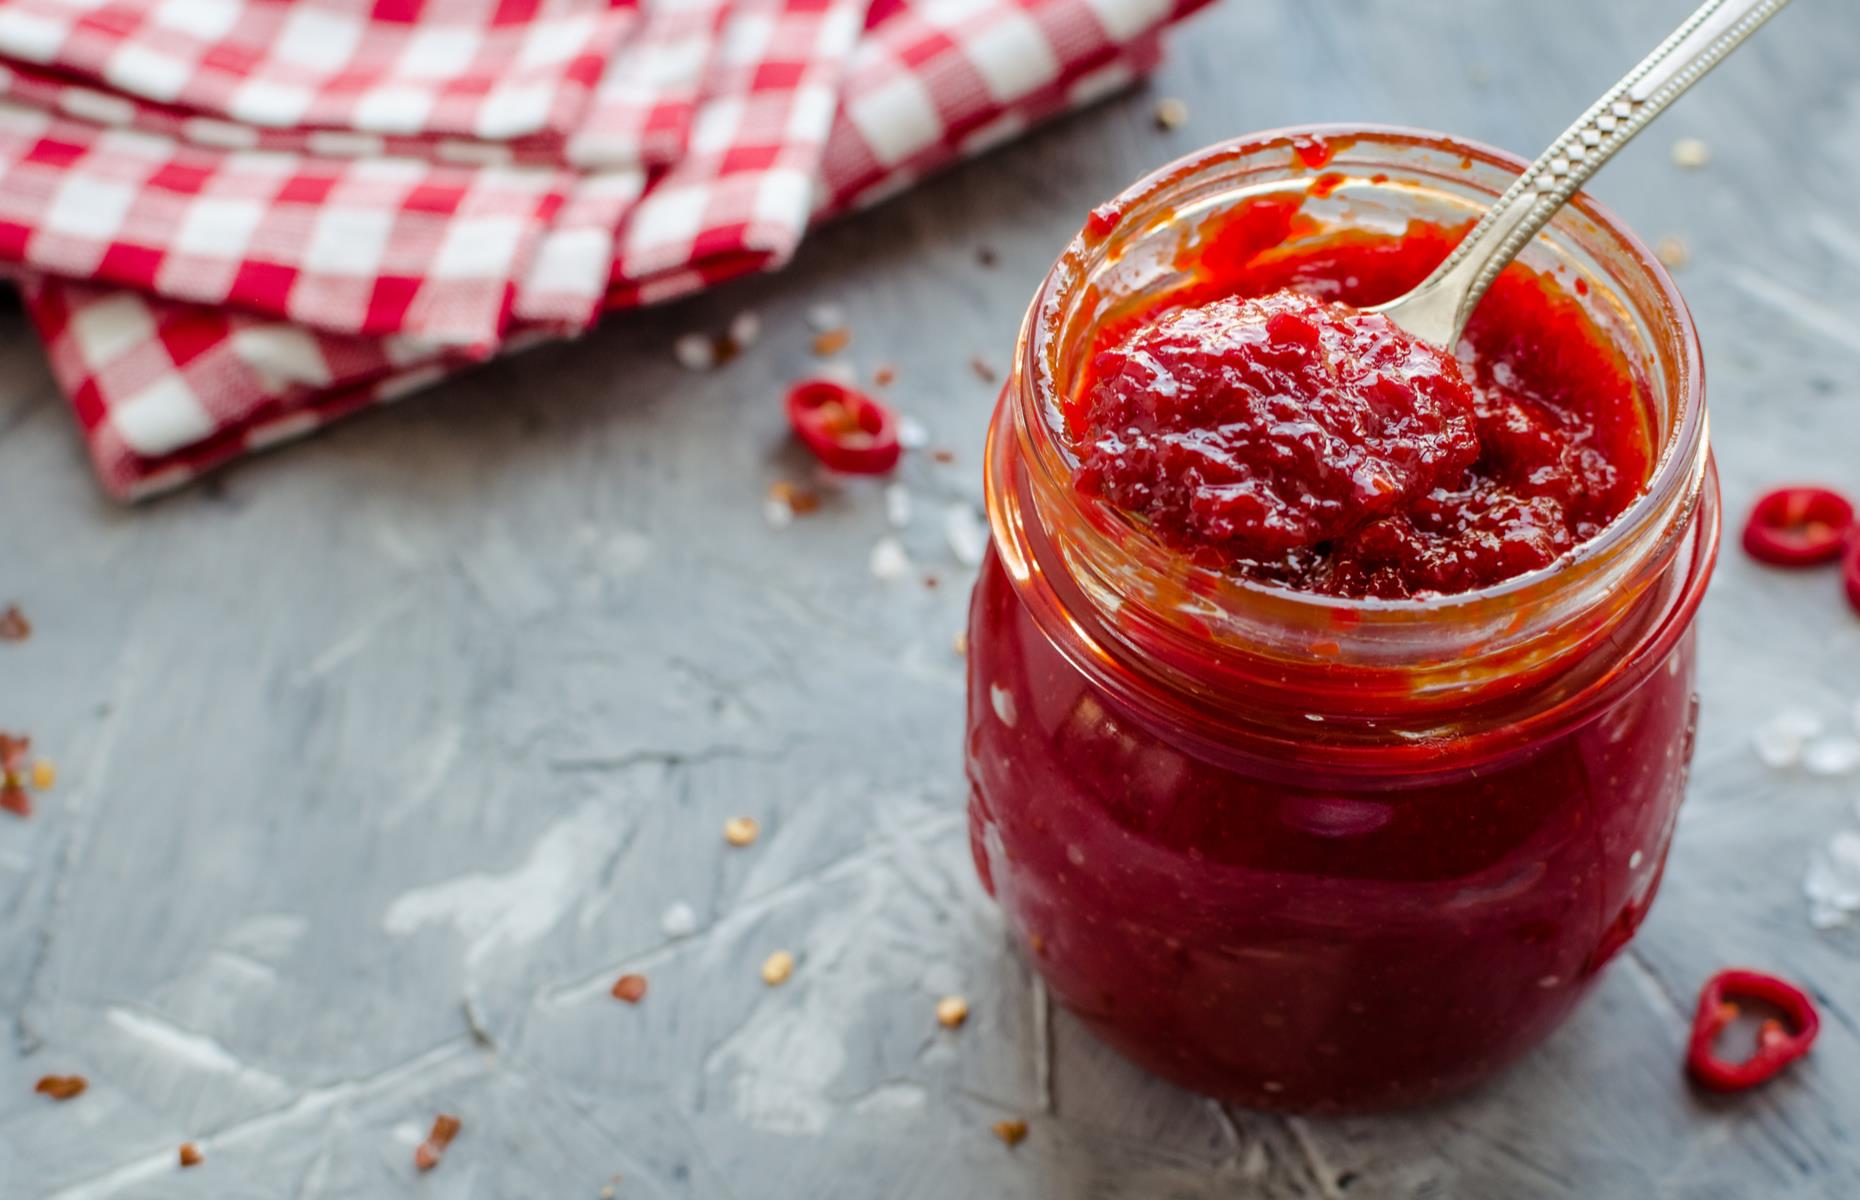 <p>Our chili jam recipe is easy to make – ready in under an hour – and will keep for three months in sterilized jars. You could add a spoonful to a chili con carne, a tomato-based pasta sauce or serve it with Thai-style fishcakes. It's great with nachos or to pep up a cheese sandwich.</p>  <p><a href="https://www.lovefood.com/recipes/57263/grow-and-cook-chilli-jam-recipe"><strong>Get the recipe for chili jam here</strong></a></p>